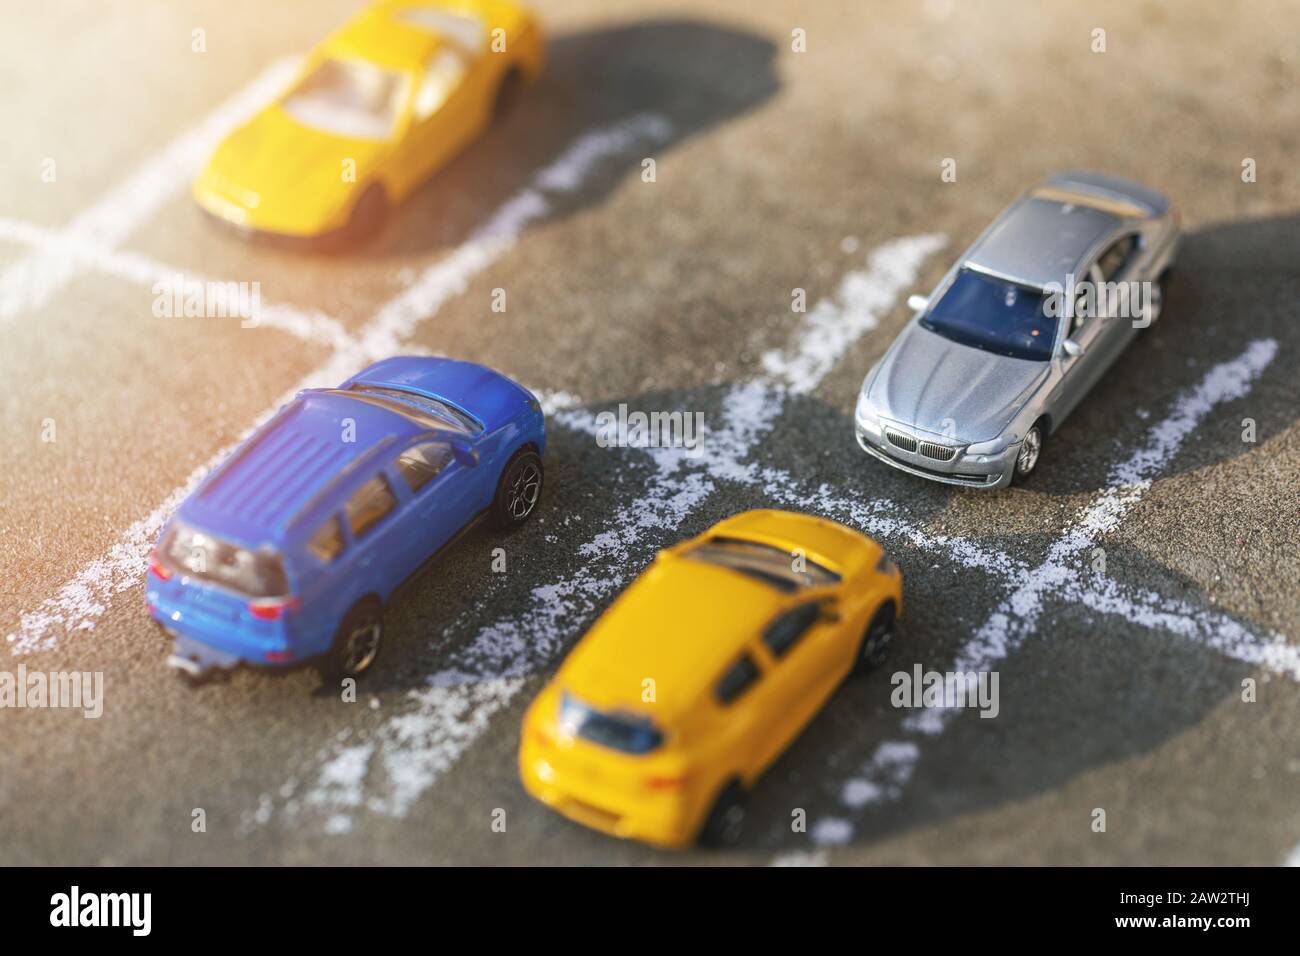 toy cars on parking lot Stock Photo